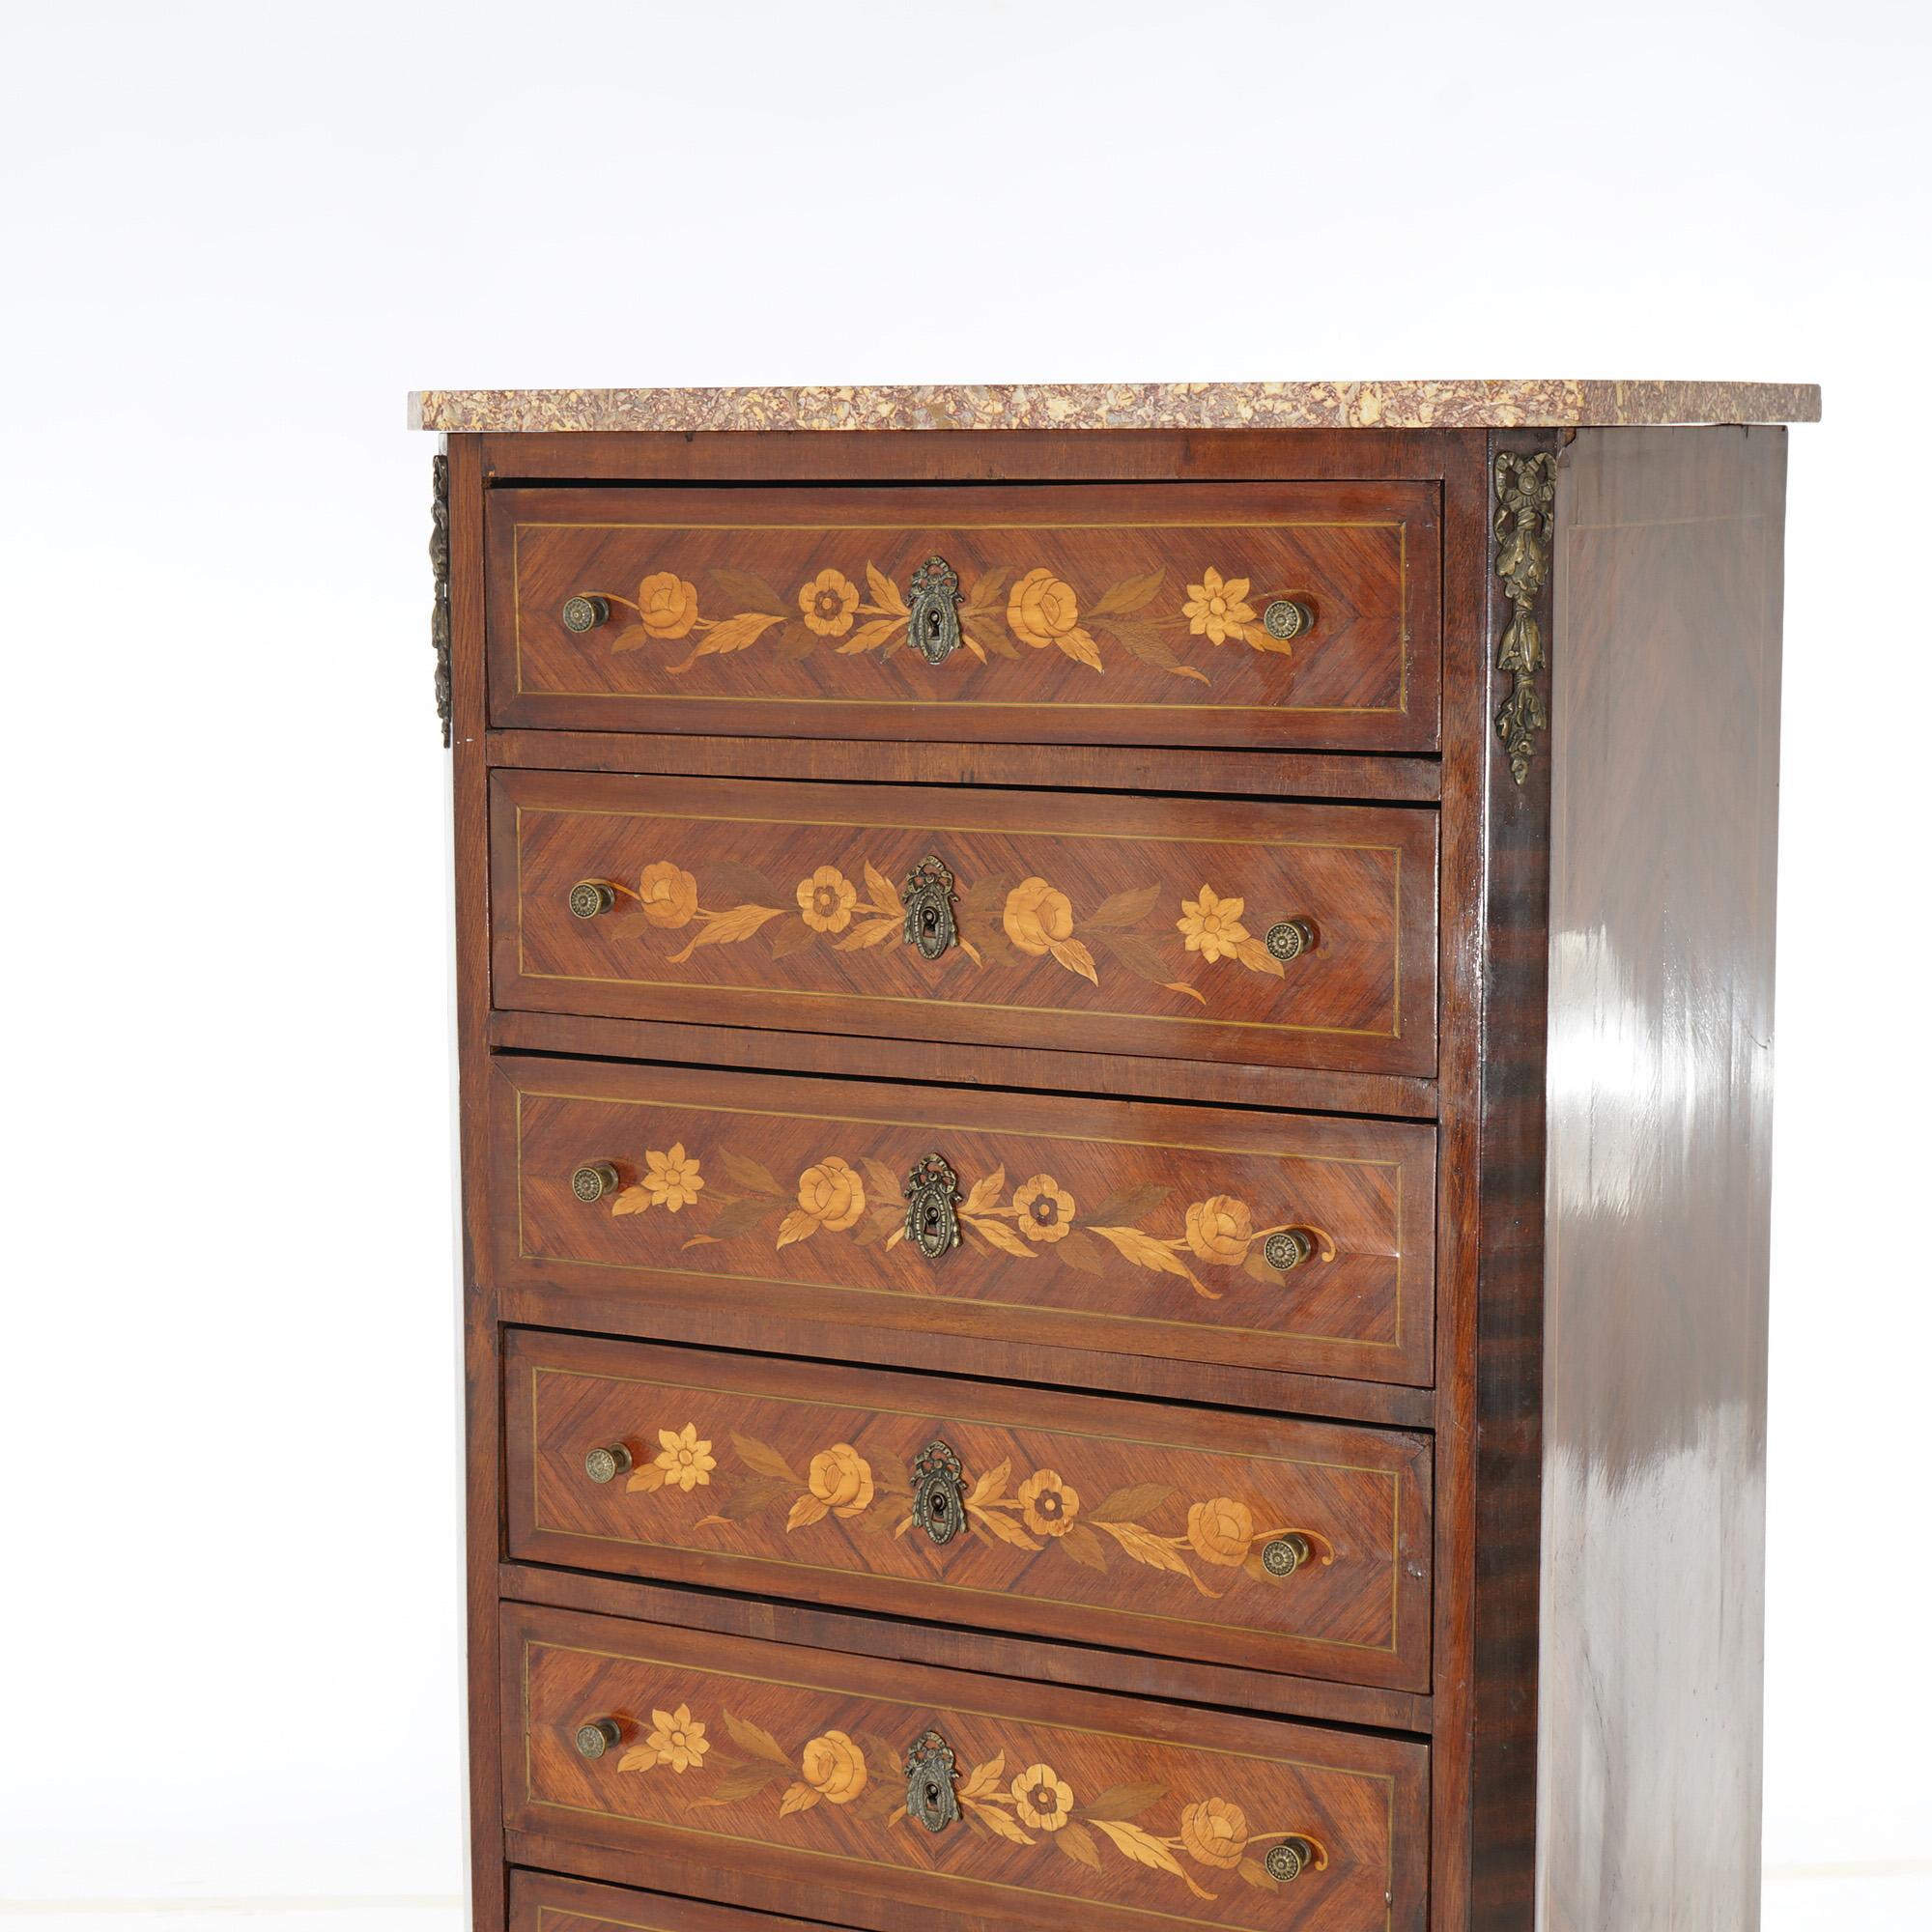 An antique French lingerie chest offers marble top case with kingwood facing, satinwood, floral marquetry inlay, seven drawers, ormolu mounts and raised on cabriole legs, 19th century

Measures- 55''H x 27''W x 16.25''D

Catalogue Note: Ask about